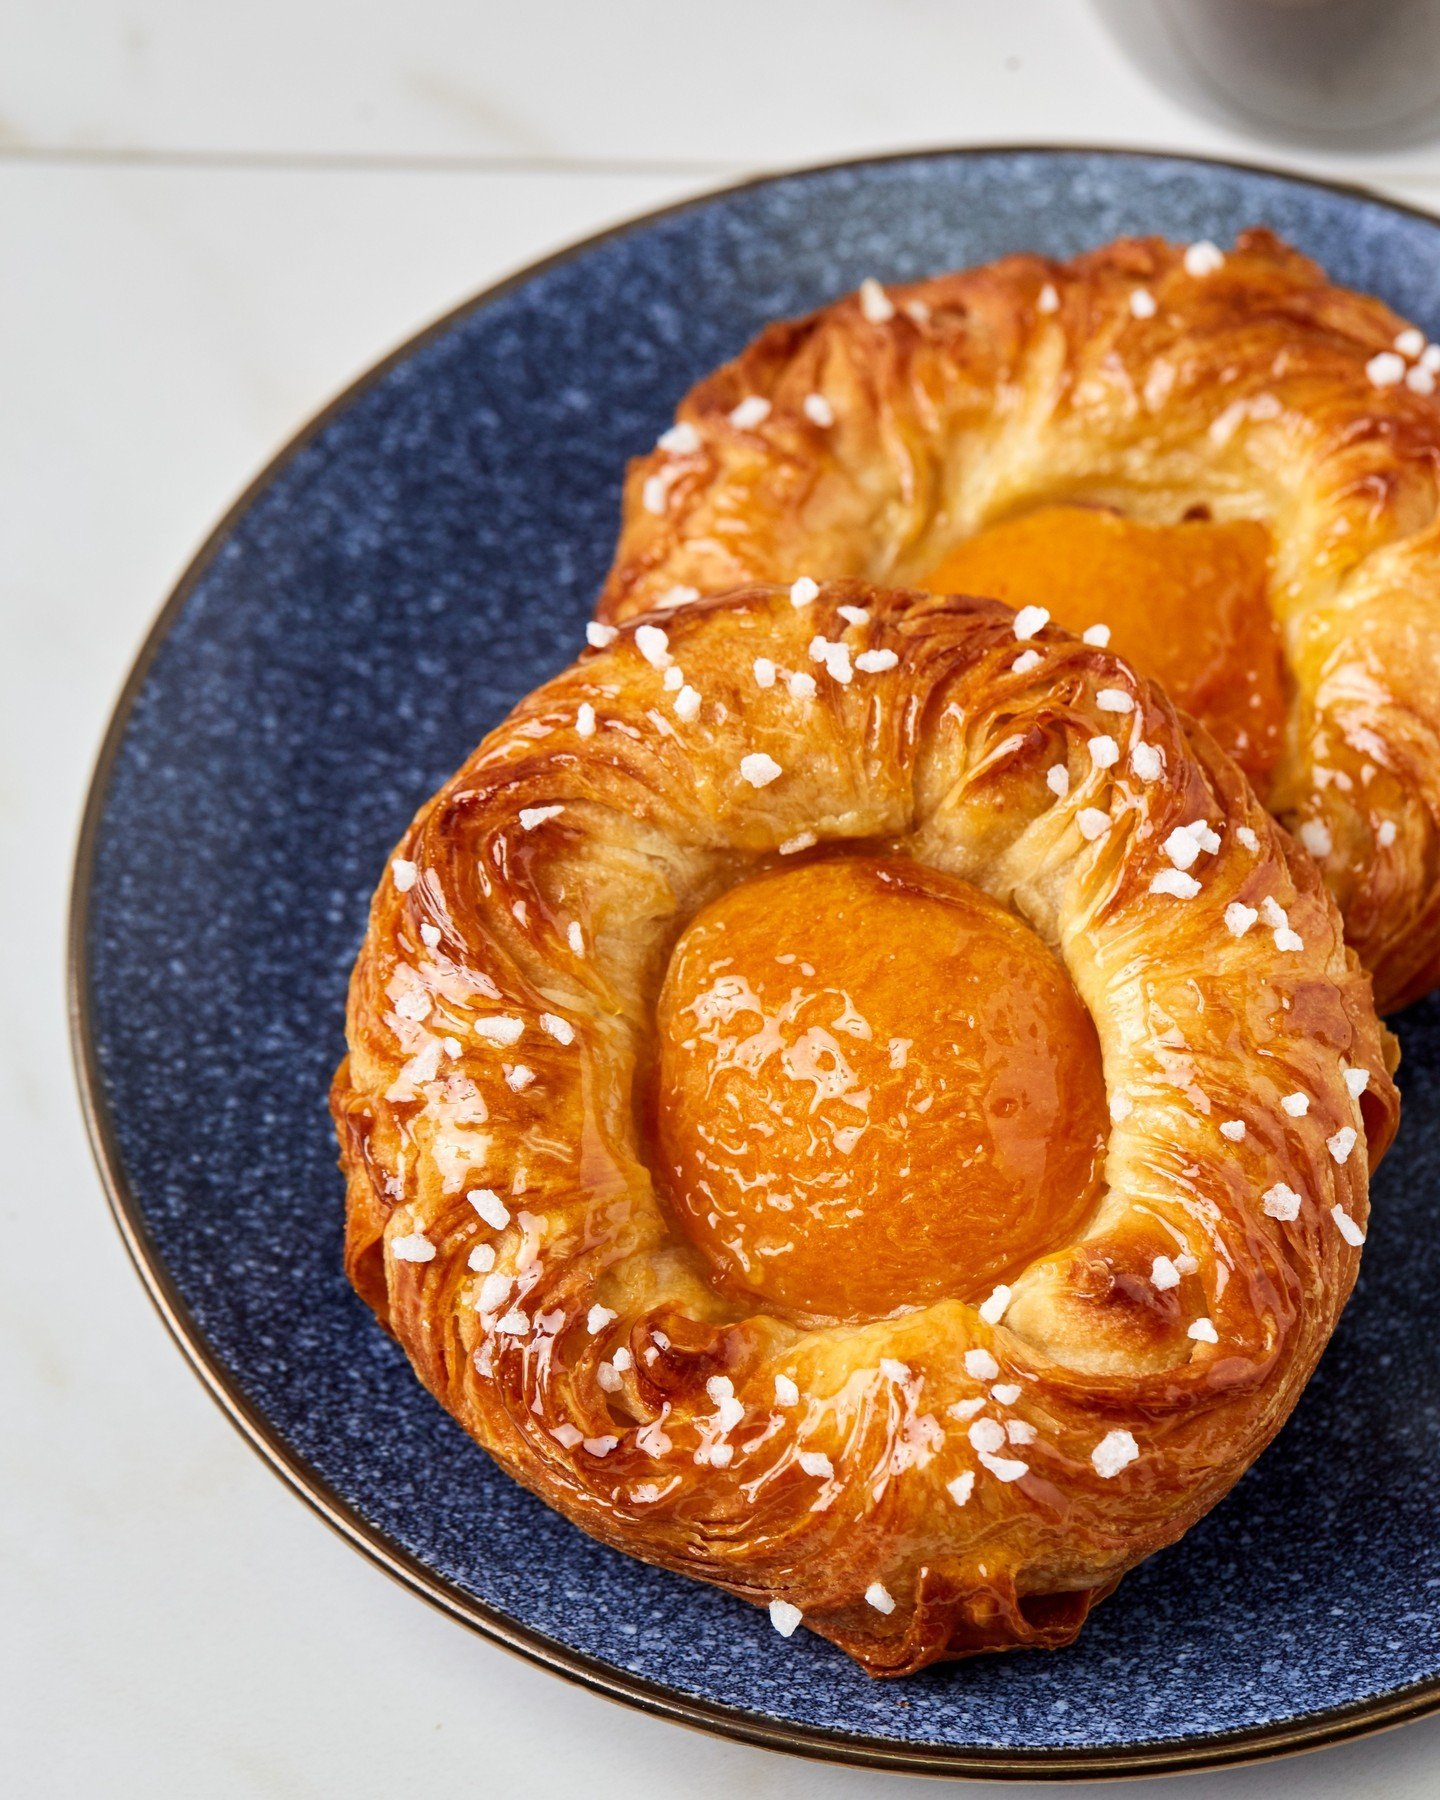 As bright as springtime, the Apricot Danish has returned for the season. If you've had a chance to try this sweet breakfast treat already, let us know what you think!